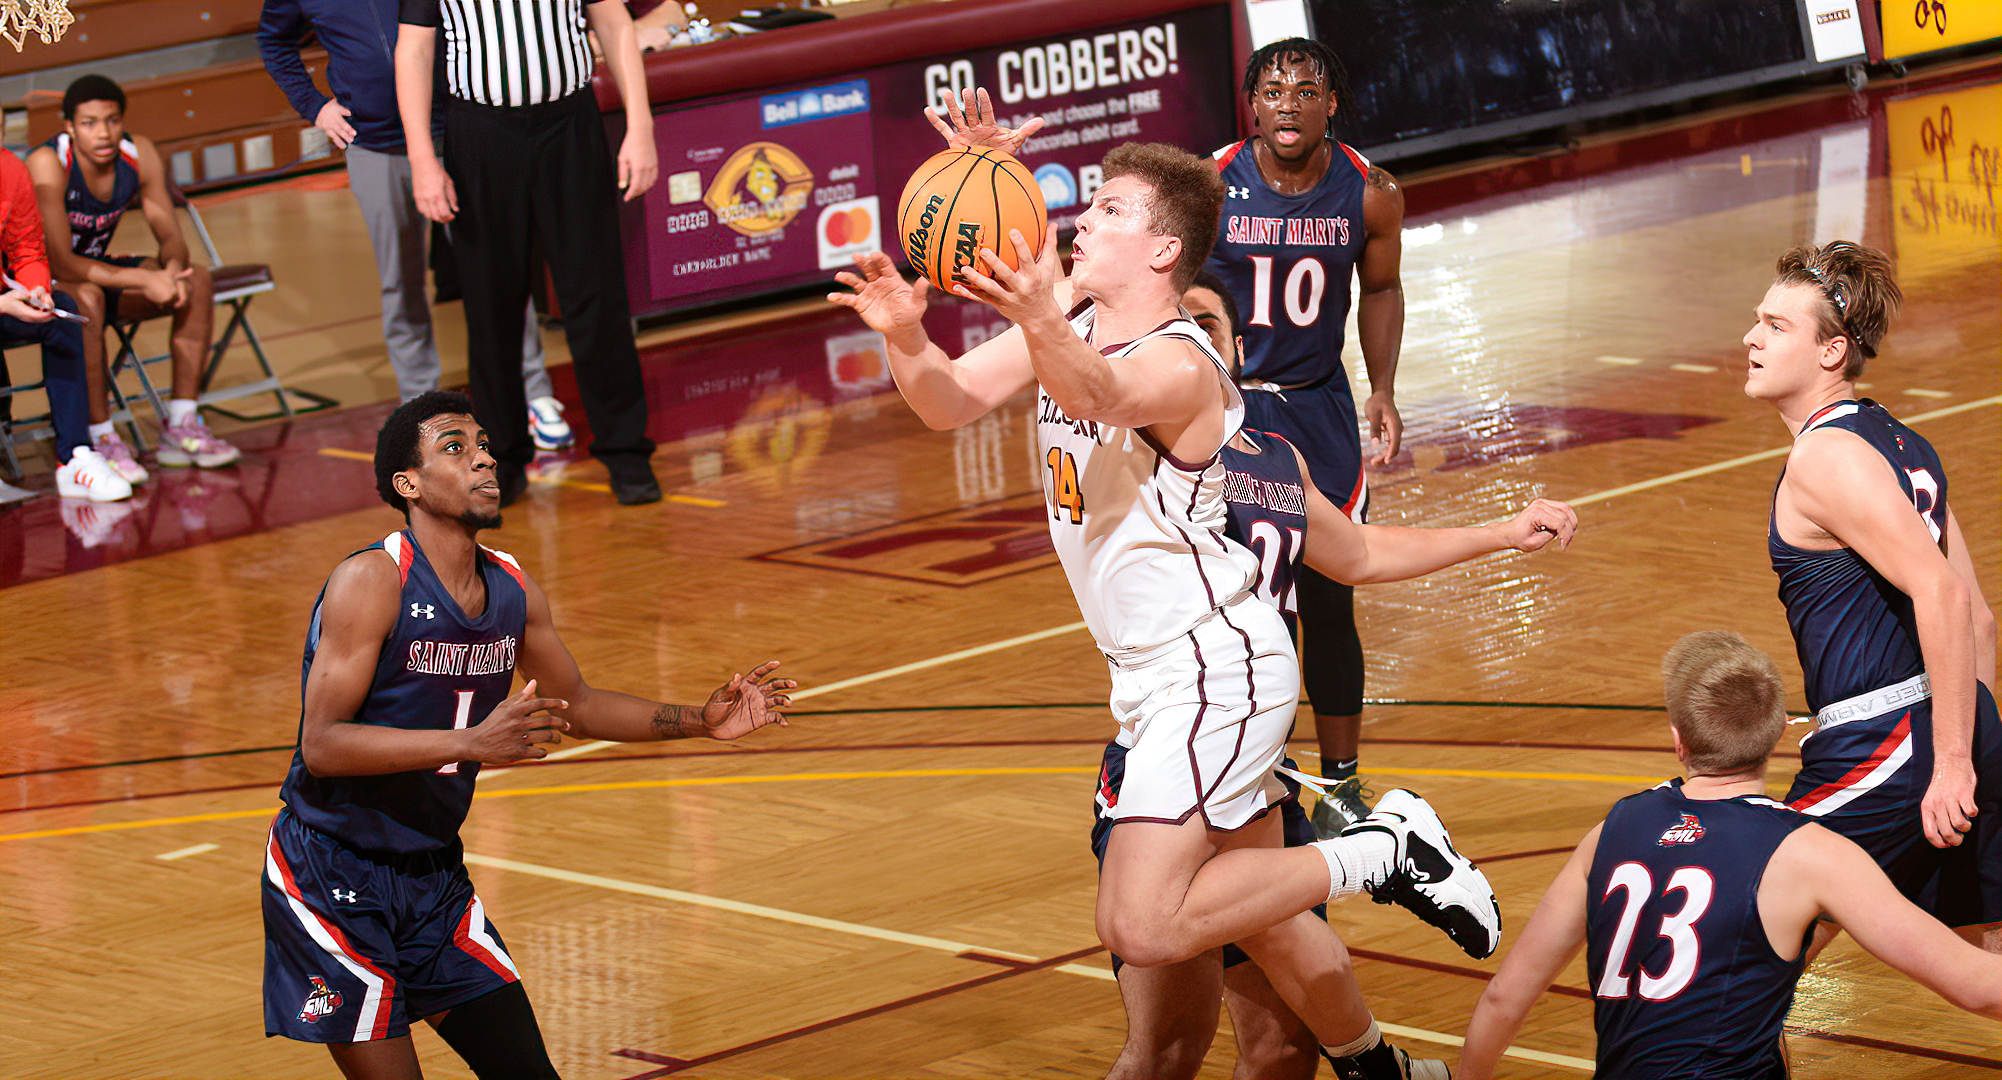 Junior Rowan Nelson scored a season-high 21 points and added five rebounds and three assists in the Cobbers' win at St. Mary's.